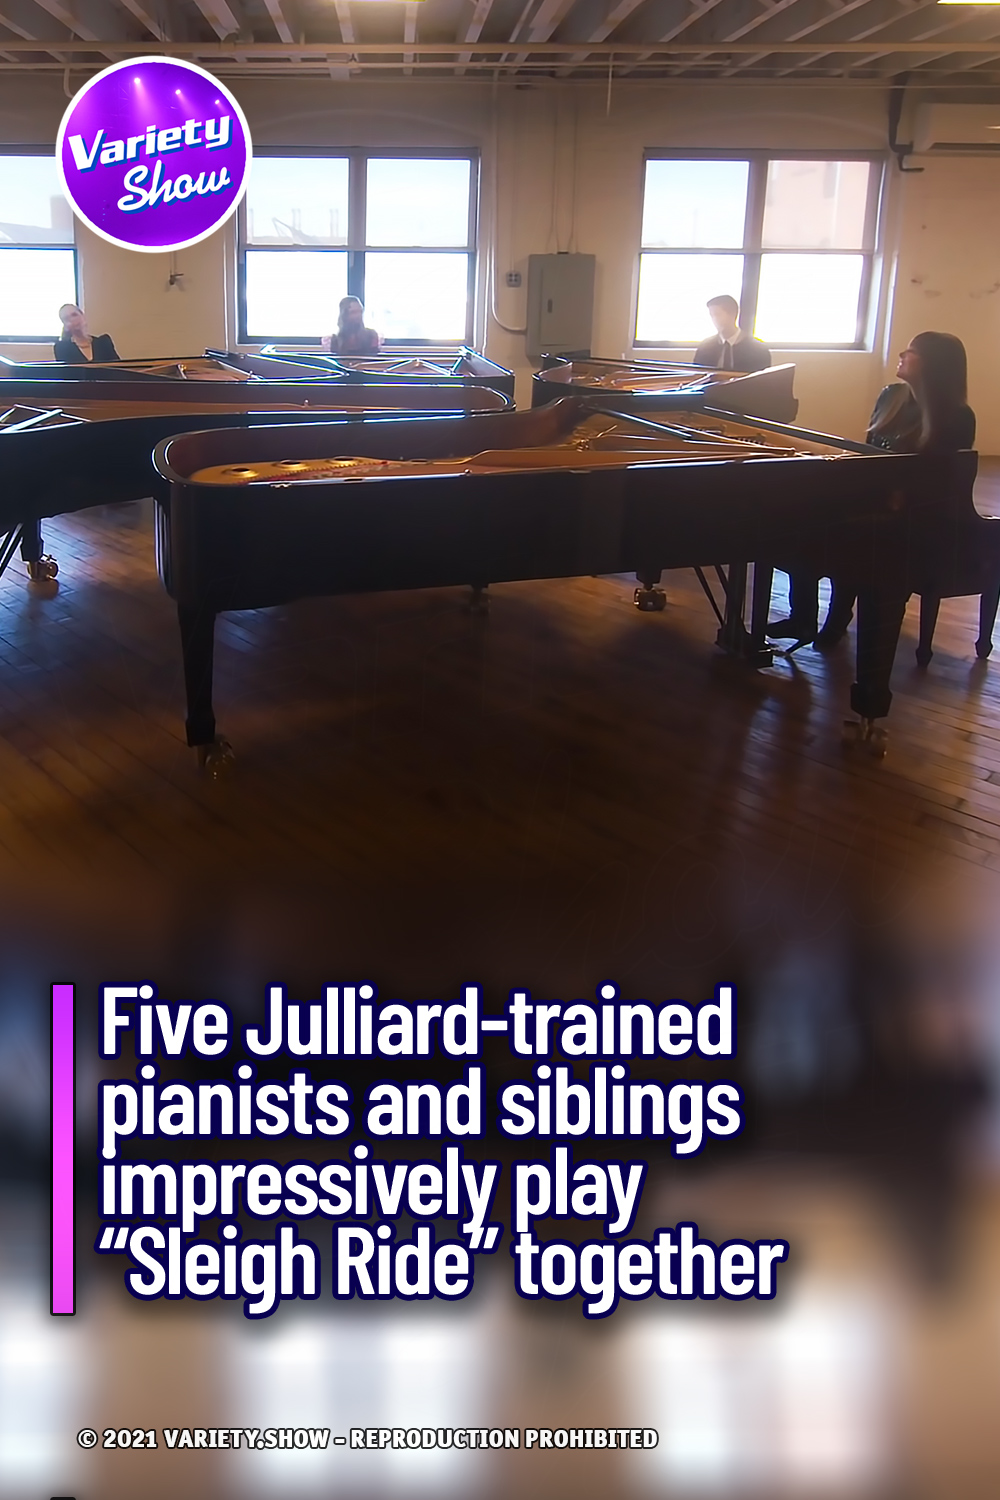 Five Julliard-trained pianists and siblings impressively play “Sleigh Ride” together